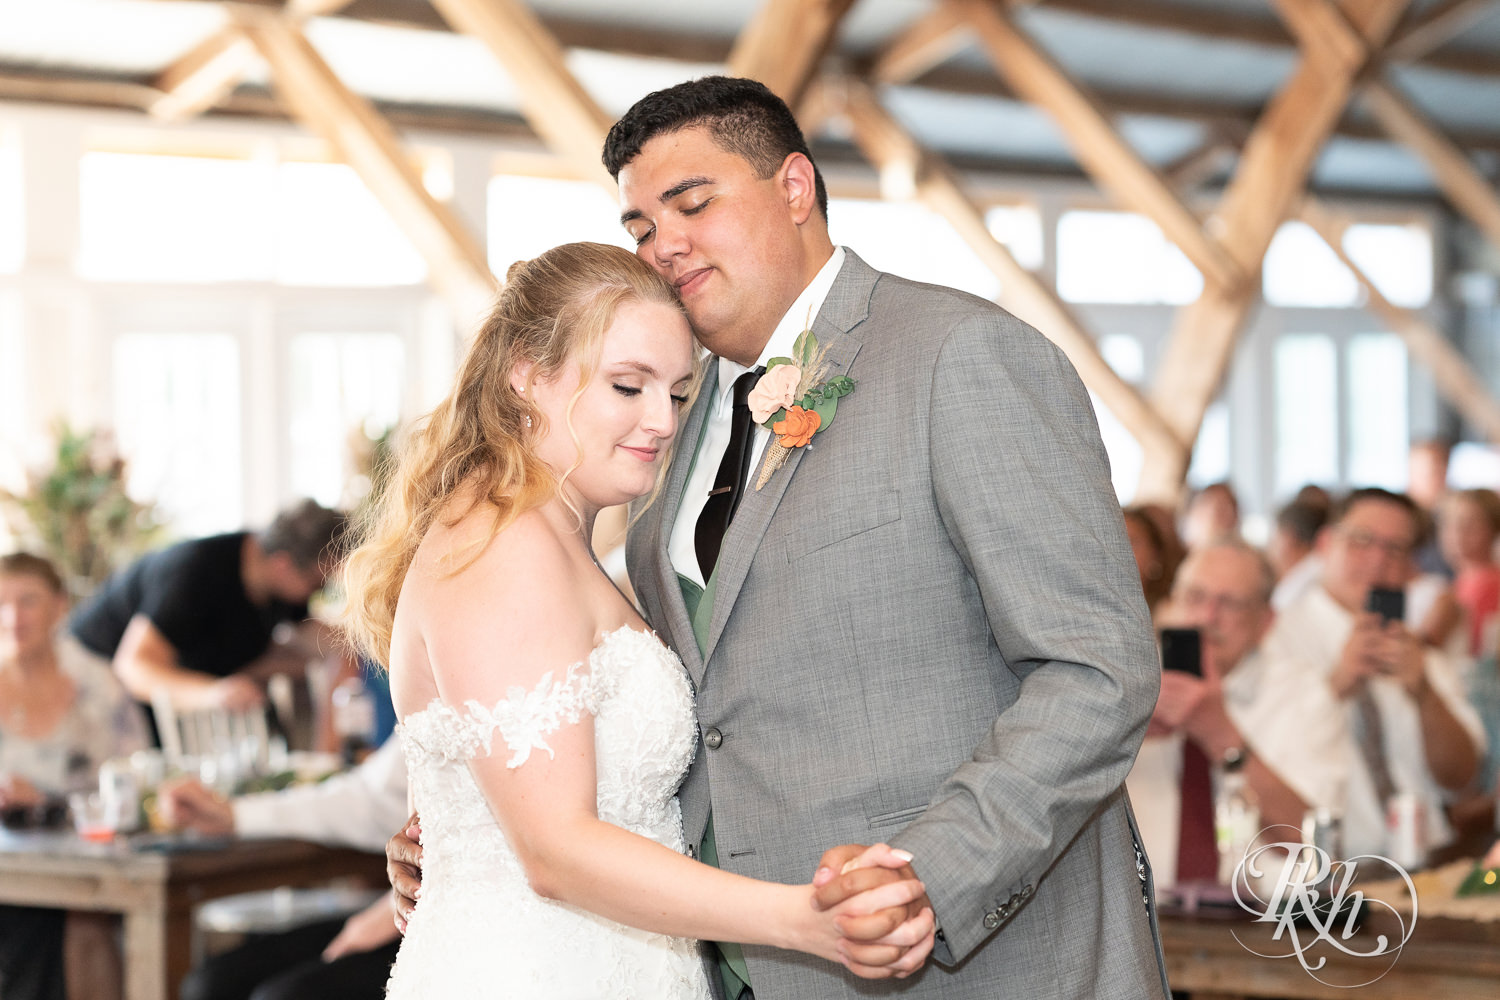 Bride and groom share first dance at wedding reception at Cottage Farmhouse in Glencoe, Minnesota.